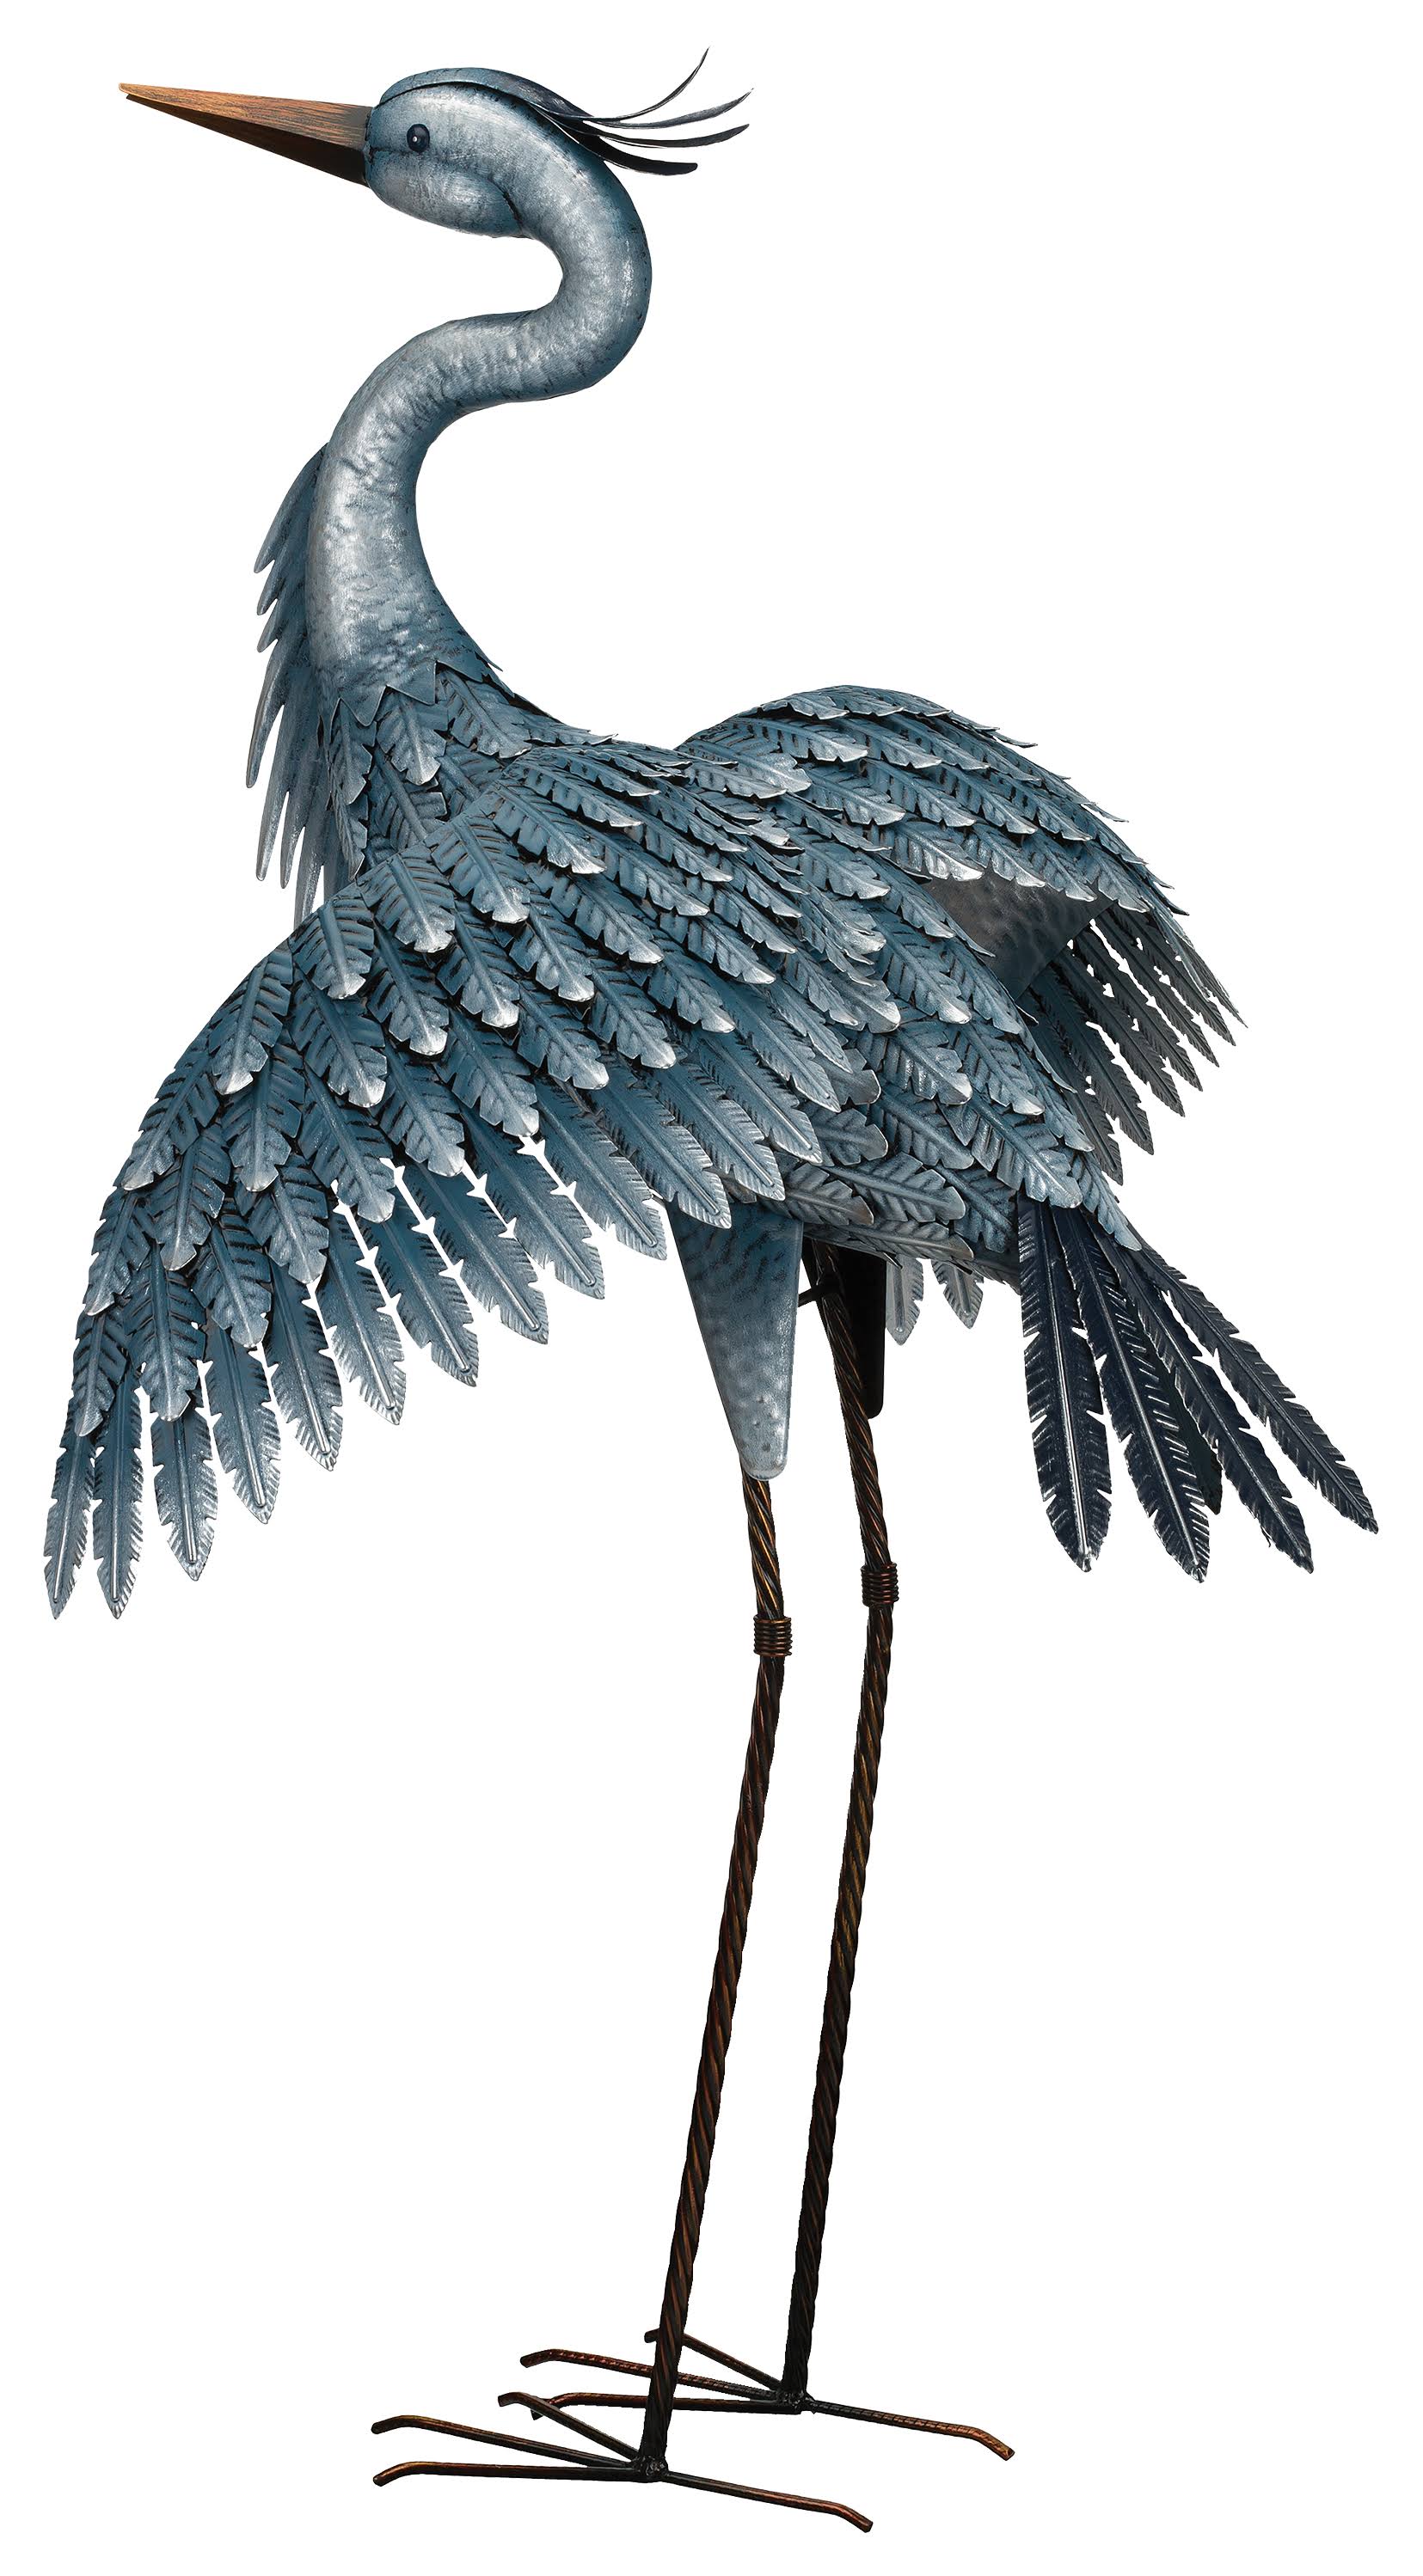 Regal Art and Gift Metallic Heron Wings Out Bird Statuary Ornament - Blue, 41"